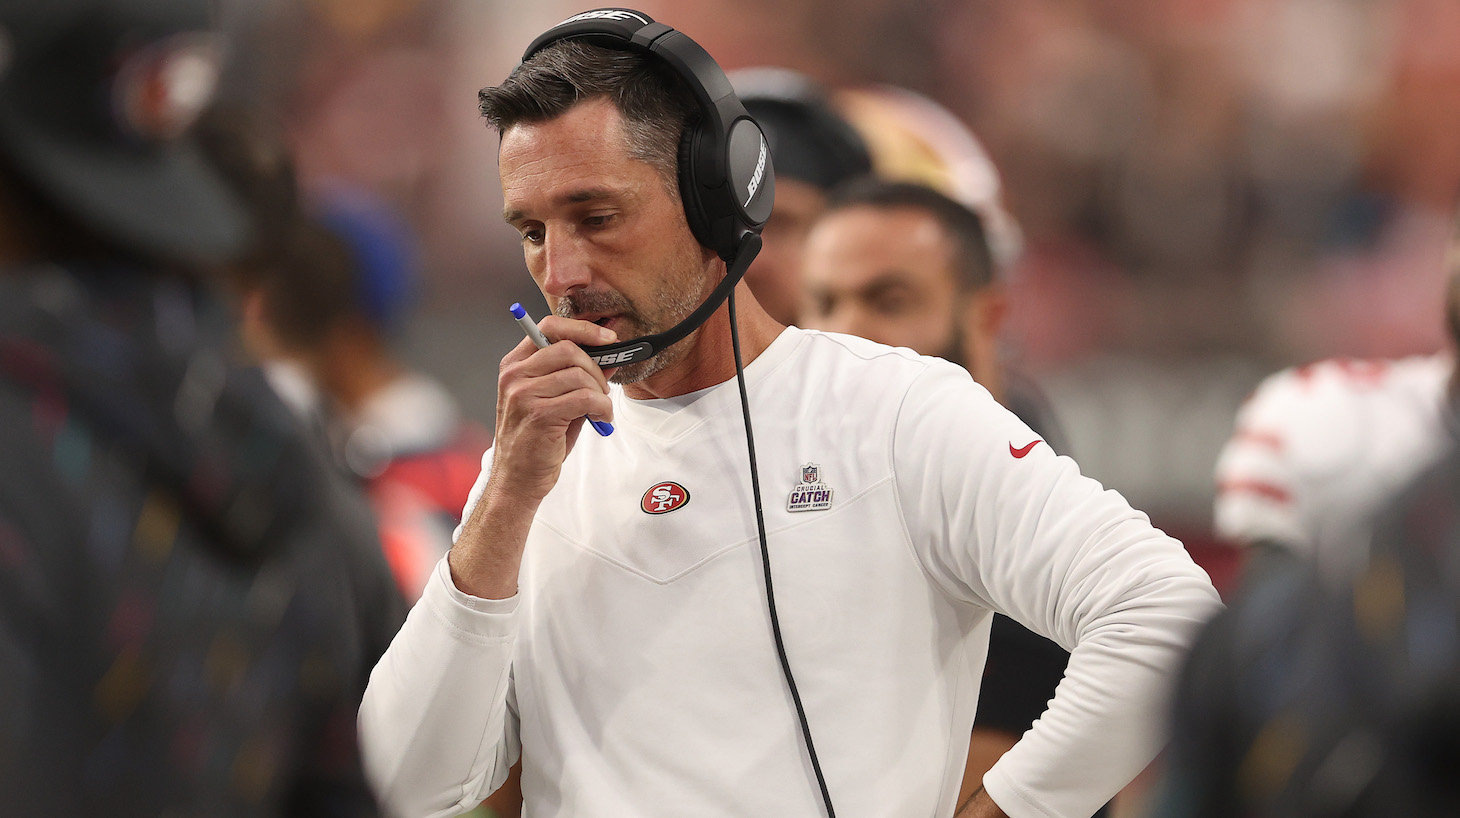 GLENDALE, ARIZONA - OCTOBER 10: Head coach Kyle Shanahan of the San Francisco 49ers looks on during the third quarter against the Arizona Cardinals at State Farm Stadium on October 10, 2021 in Glendale, Arizona. (Photo by Christian Petersen/Getty Images)